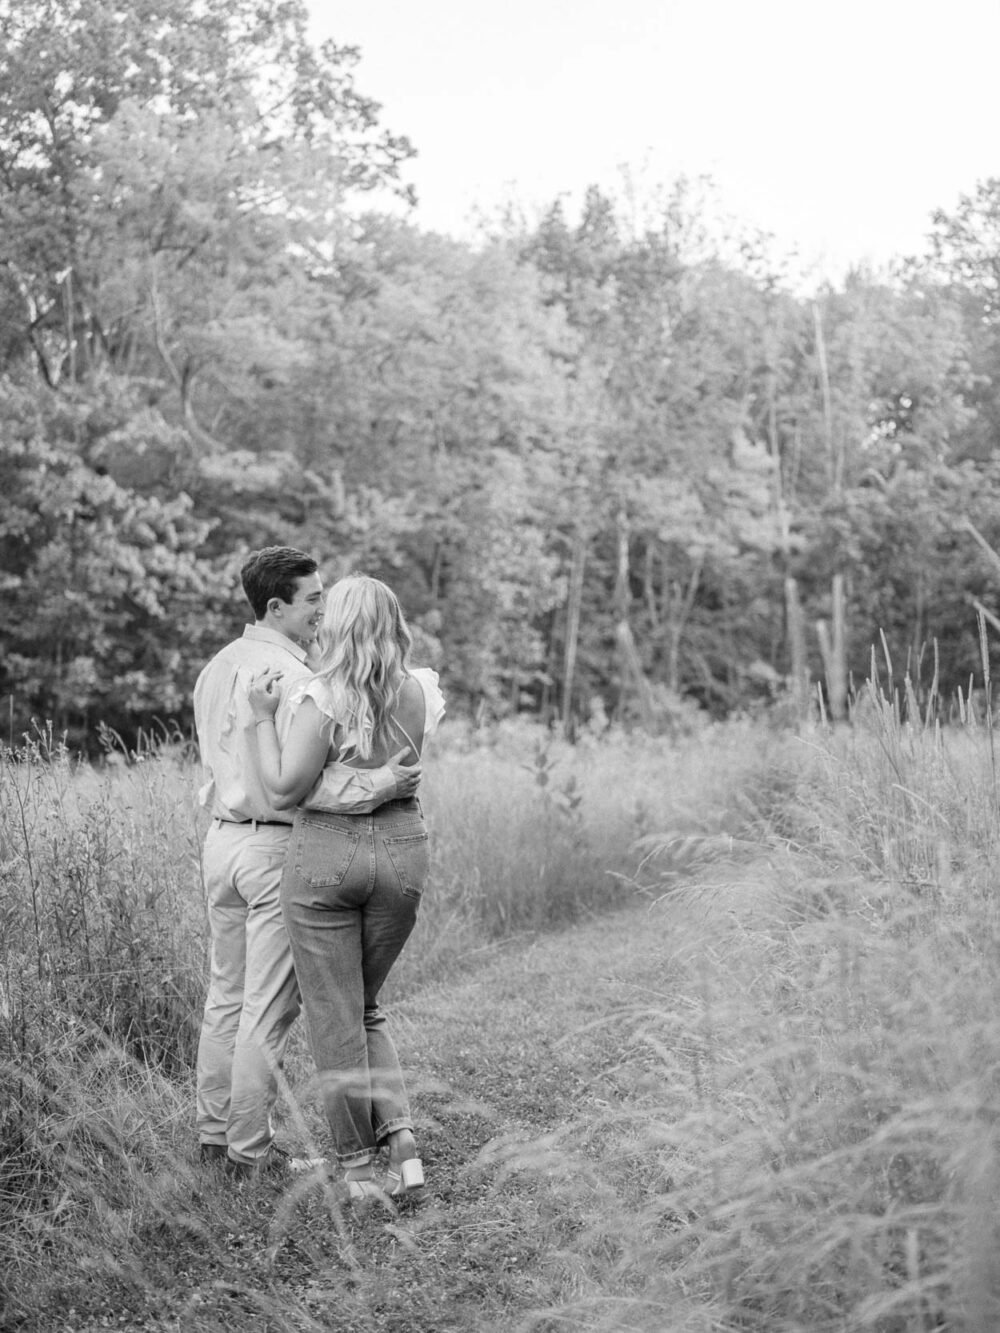 Engagement photos in a grassy field in Cleveland Ohio